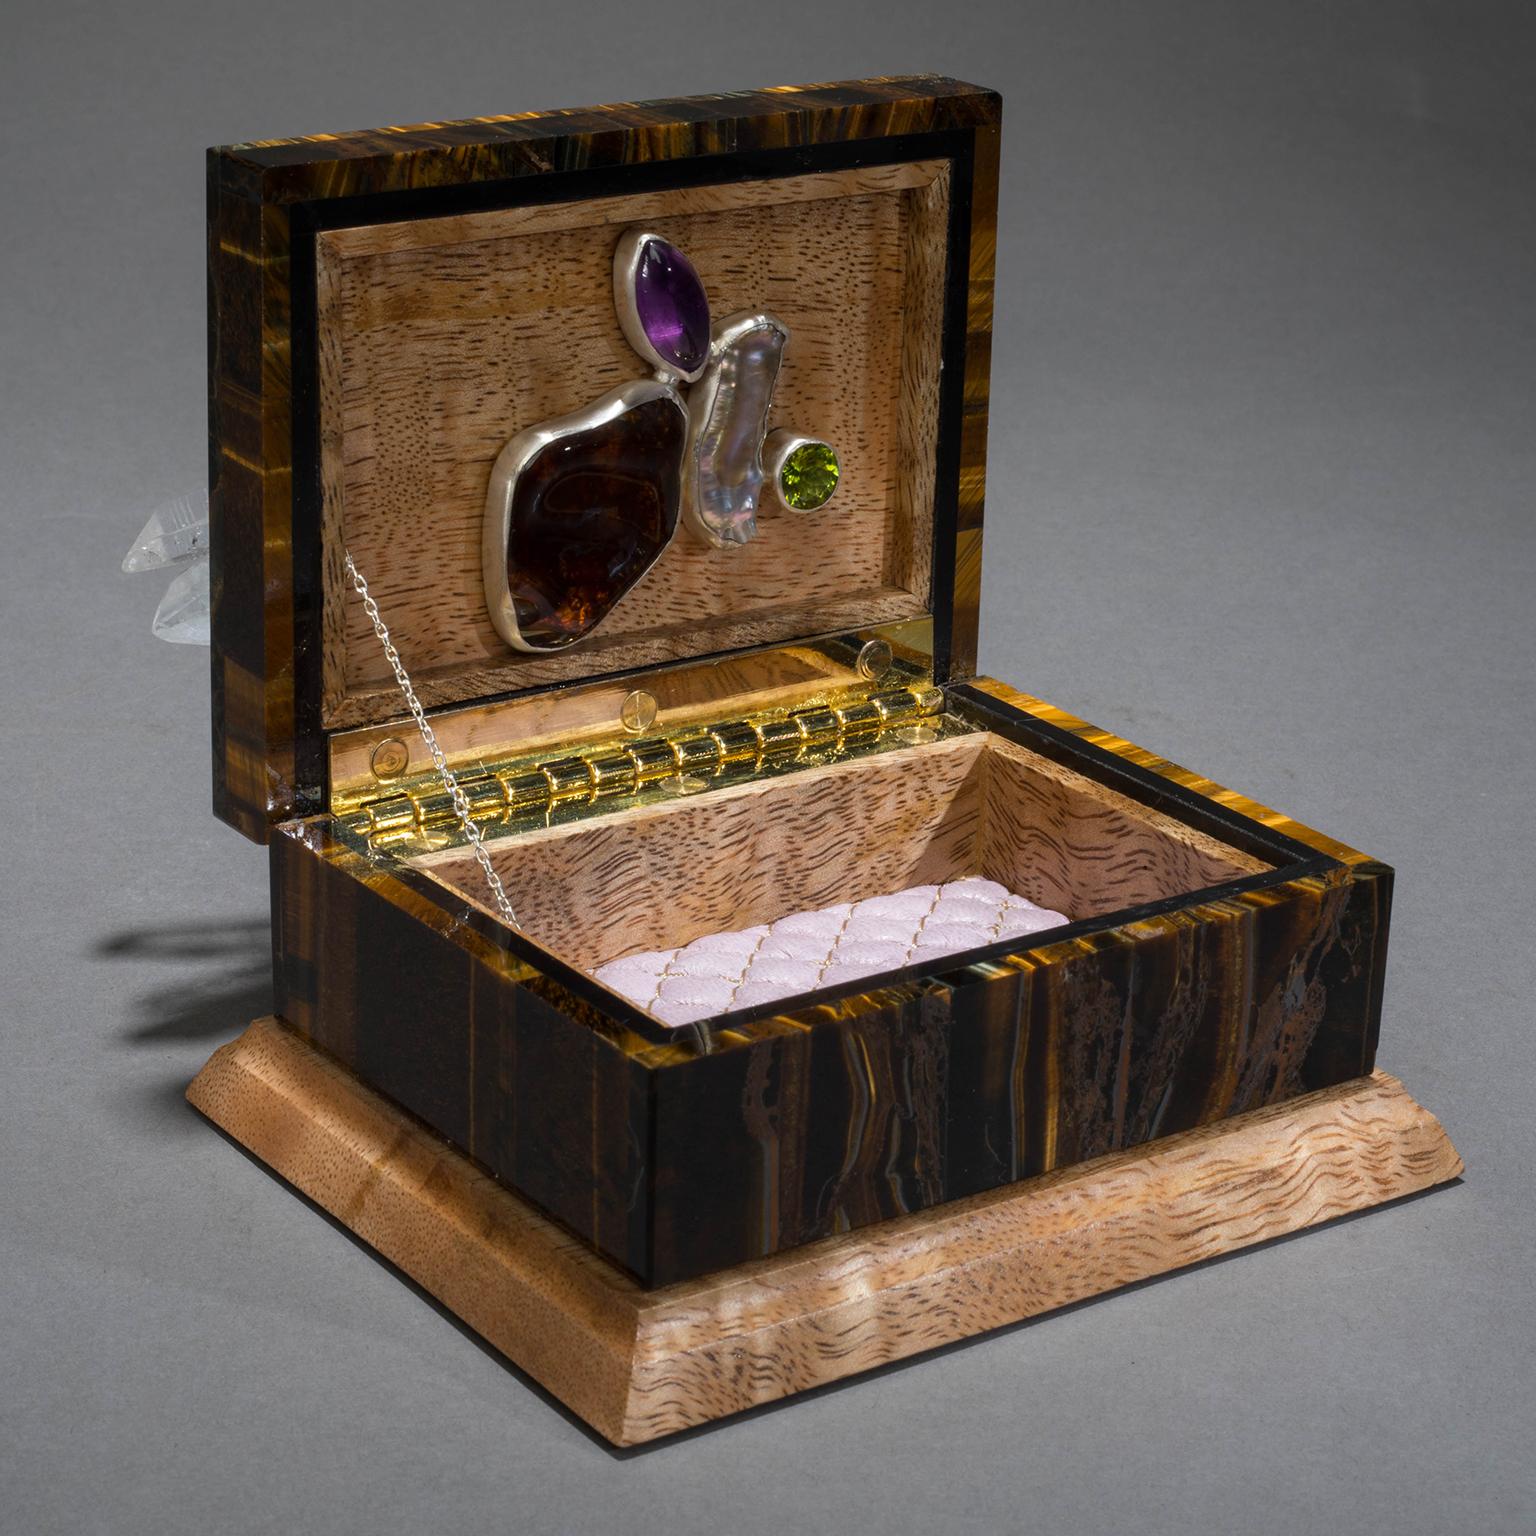 BLING BOX 2

In Studio Greytak’s Bling Box 2 nature’s imagination is on full display. A slice of heavenly raw amethyst spun through a whirlwind of quartz crystal blooms as a flawless gem atop a decidedly earthy tiger’s eye box. Nestled against the